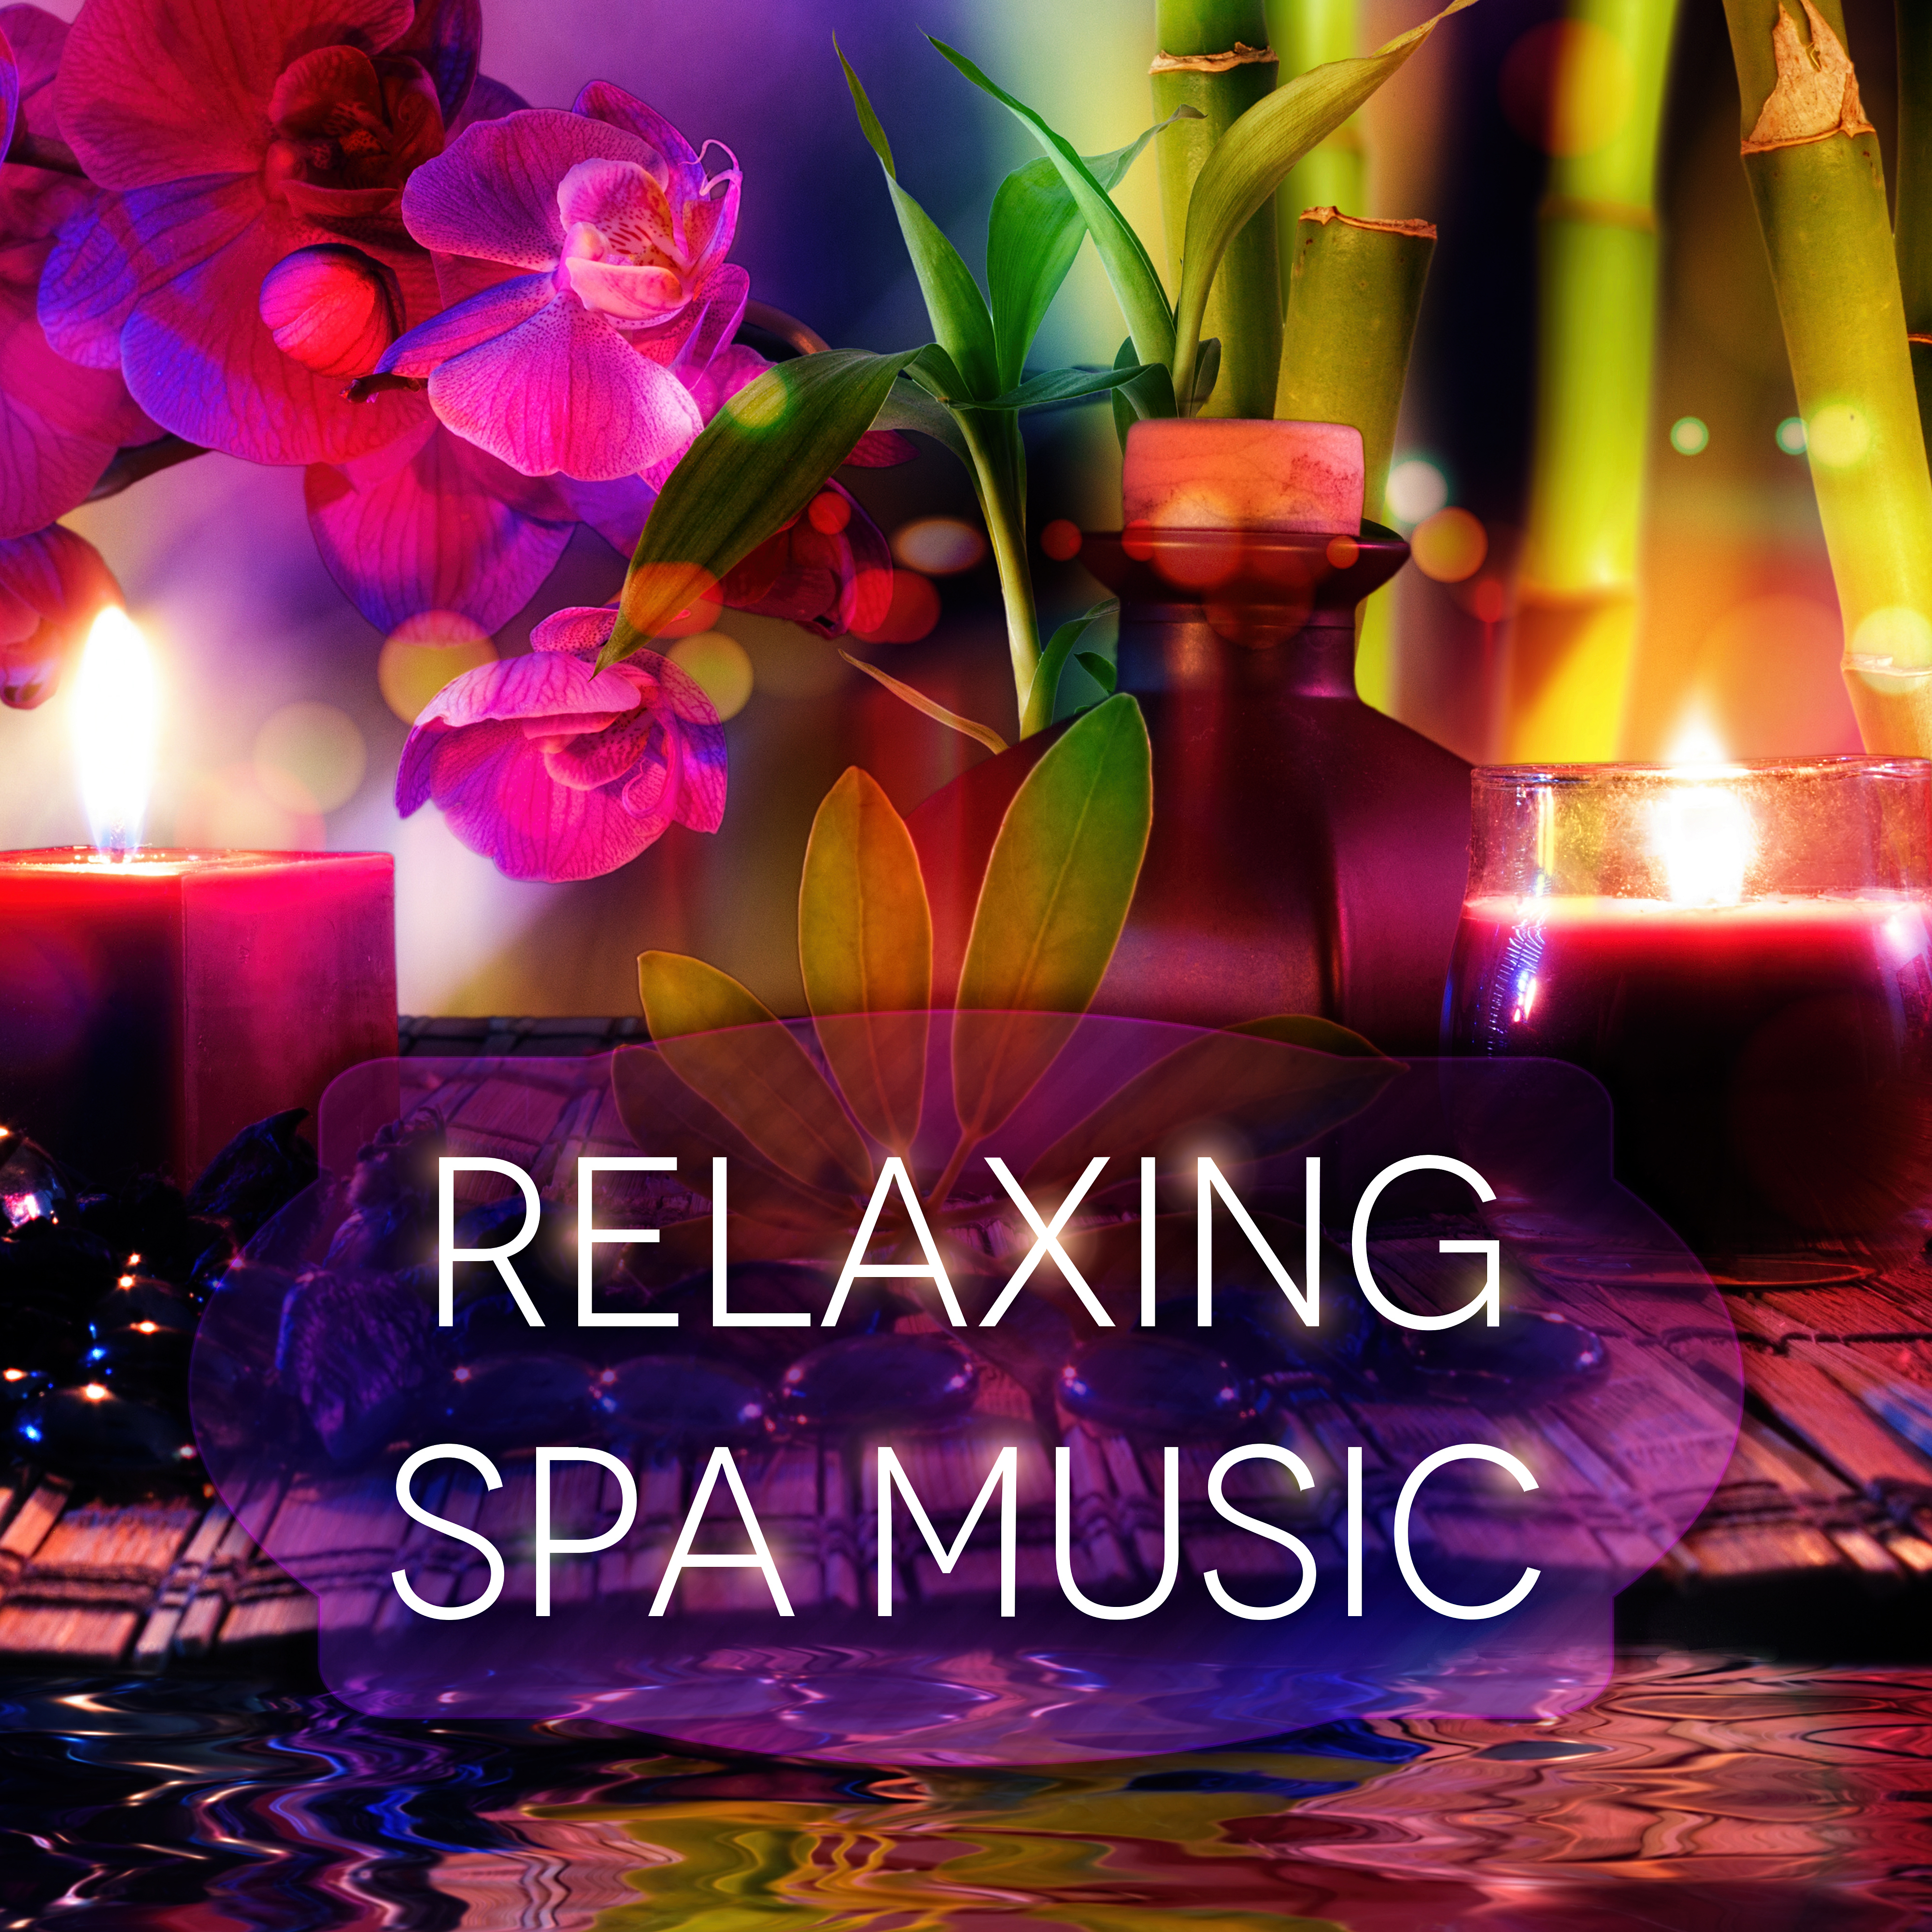 Relaxing Spa Music - Sound Therapy Music for Relaxation Meditation with Sounds of Nature, Relaxing Spa Background Music, Massage Music